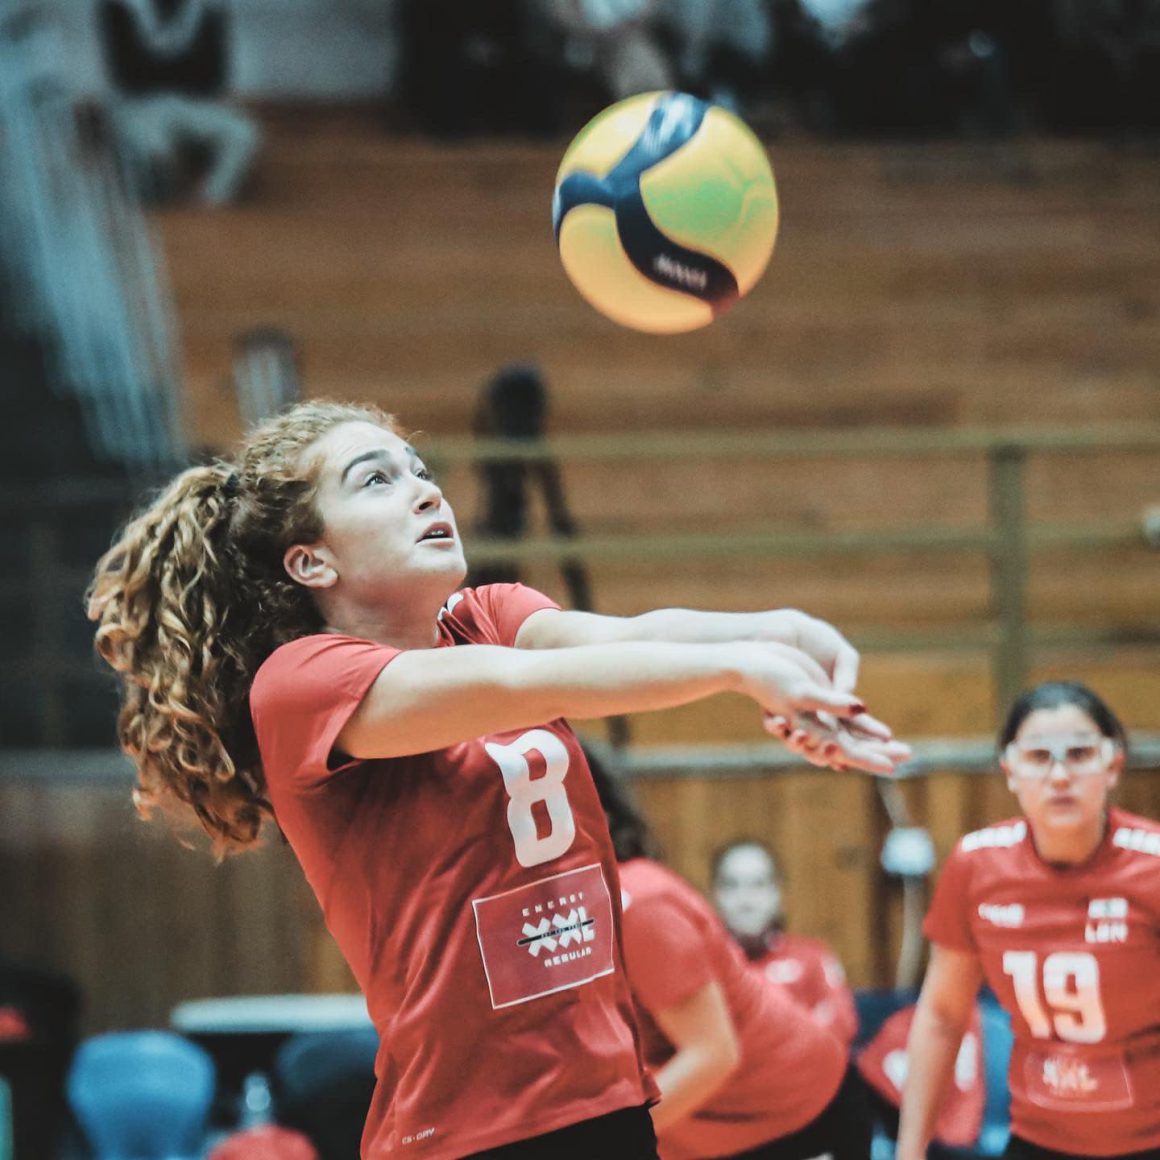 LEBANON AND HOSTS JORDAN TOP THEIR POOLS IN 1ST WEST ASIA WOMEN’S CHAMPIONSHIP IN AMMAN